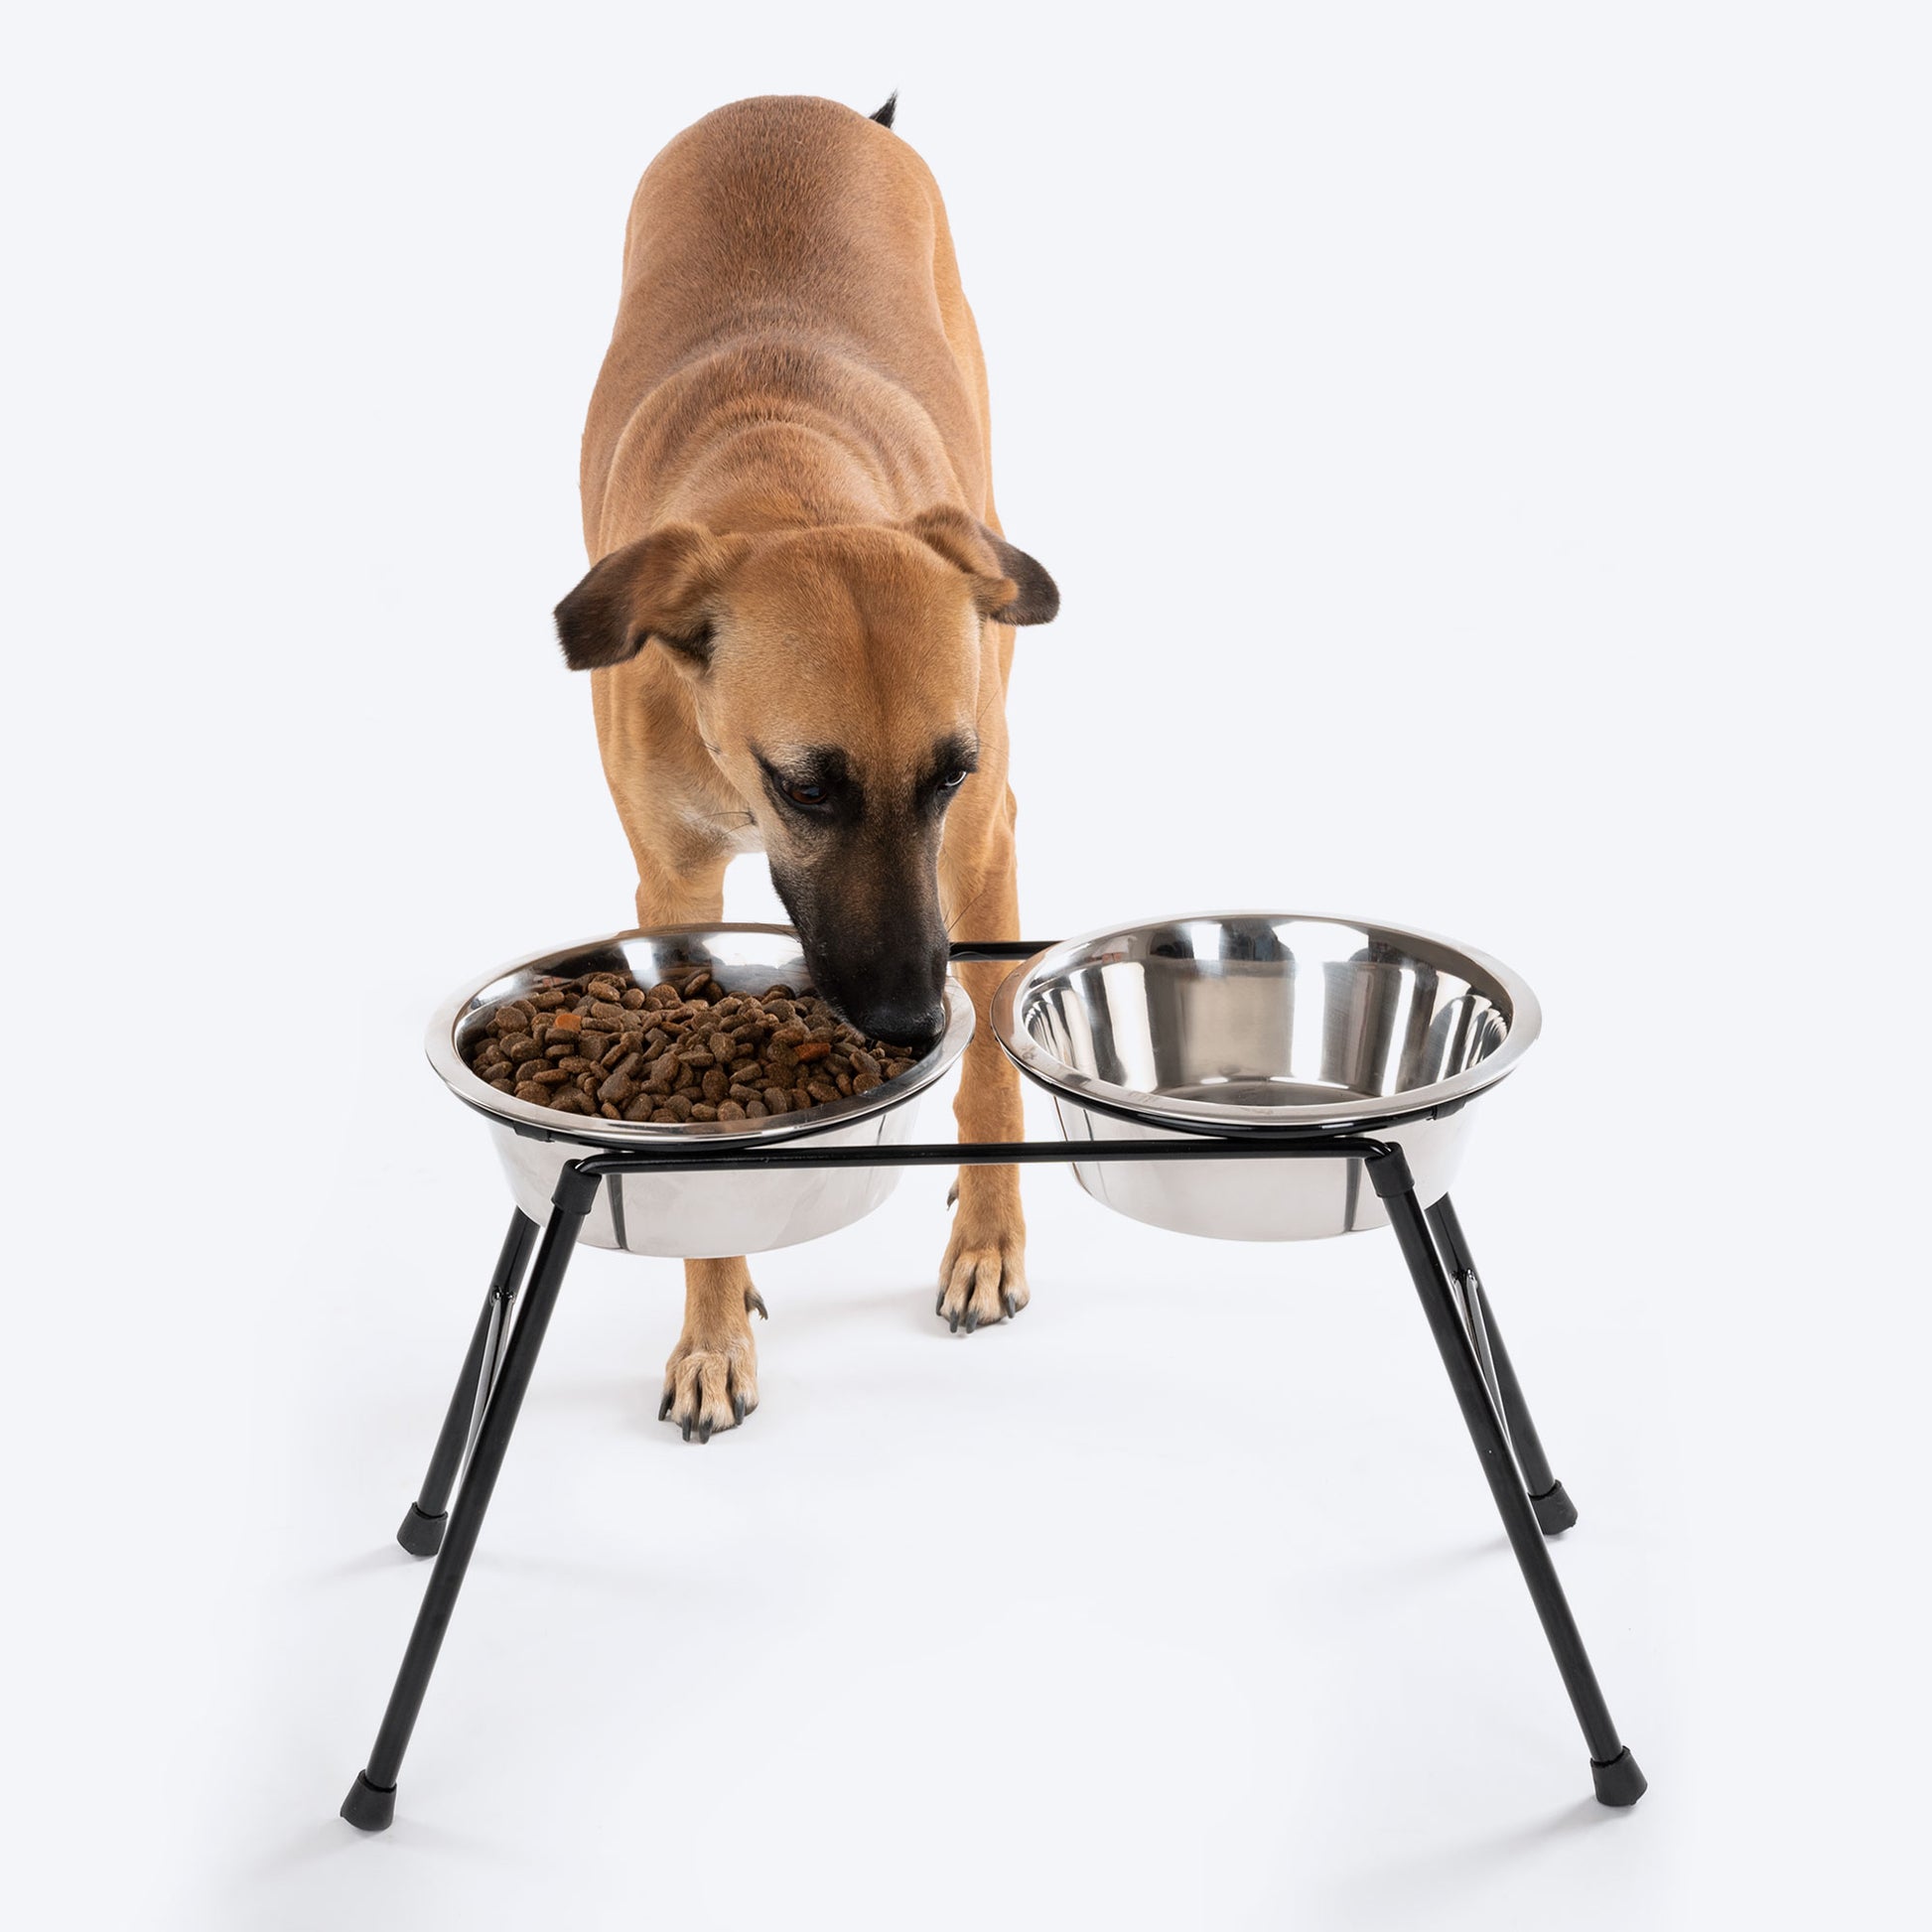 16″ tall folding wood double dog bowl stand for extra-large Pets